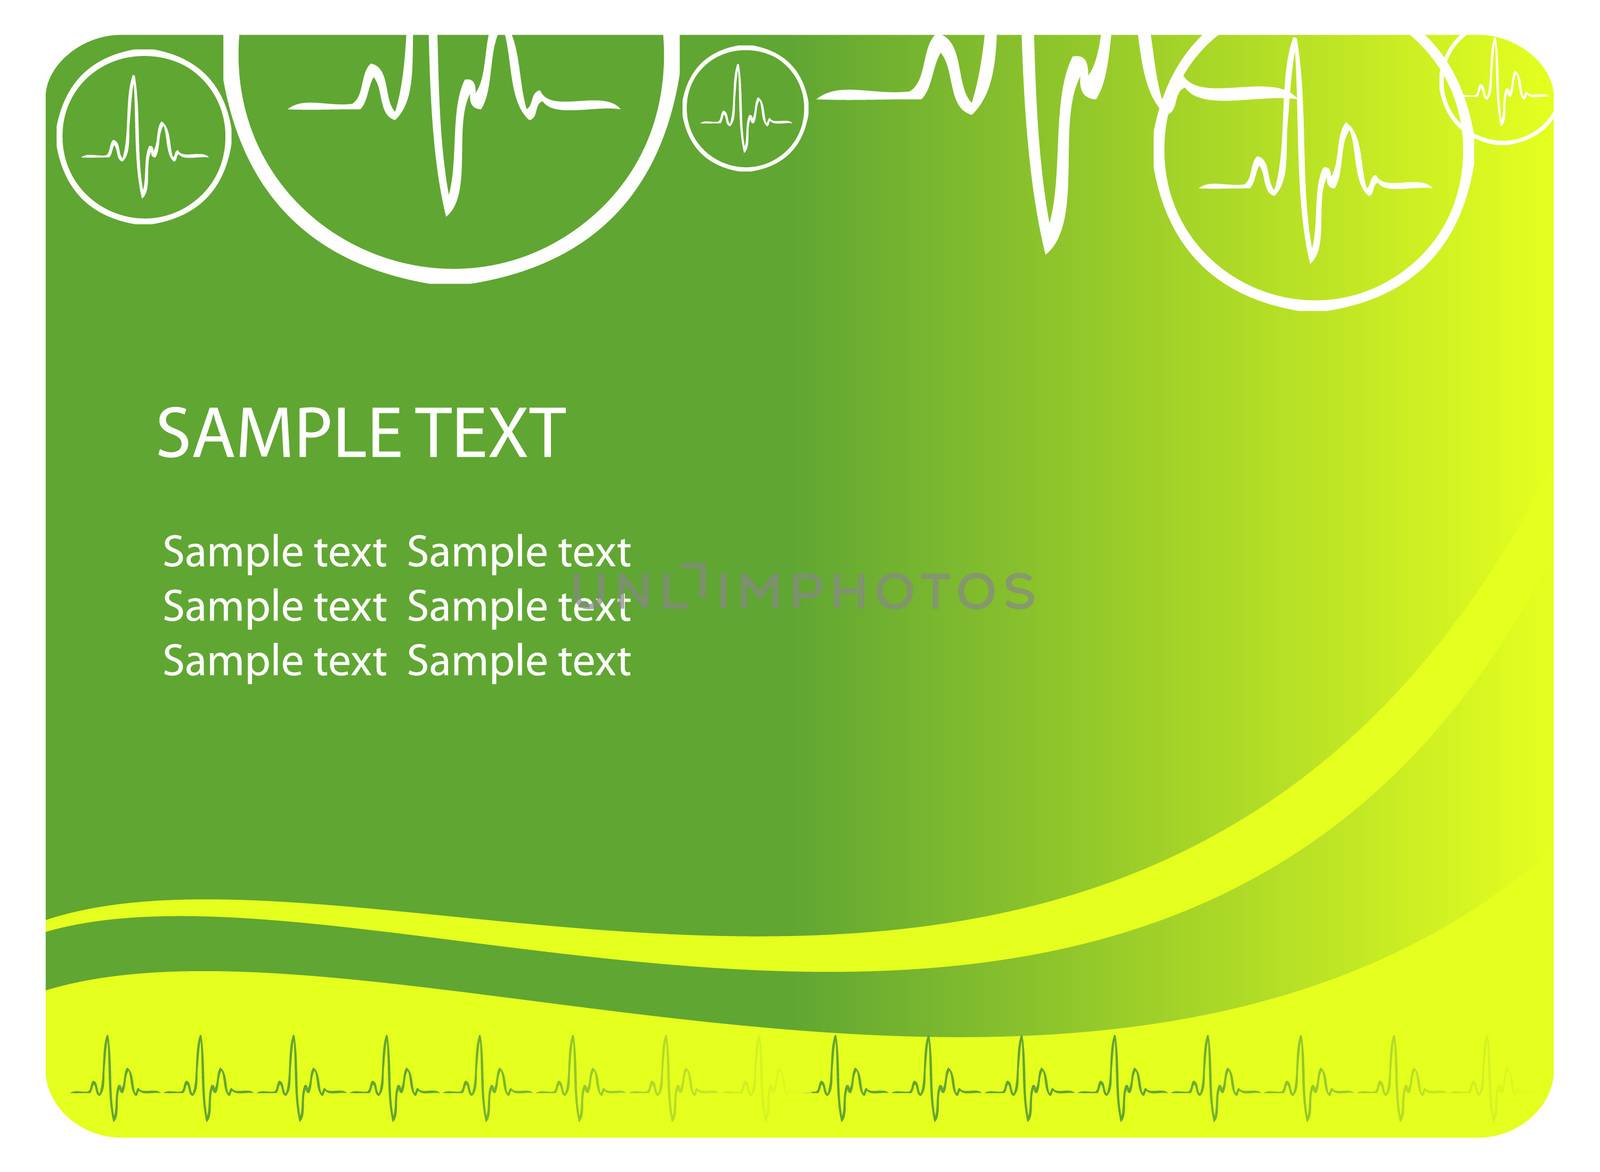 Vector cardio blue background with ecg icons and text area. Great for scientific, medical purposes.